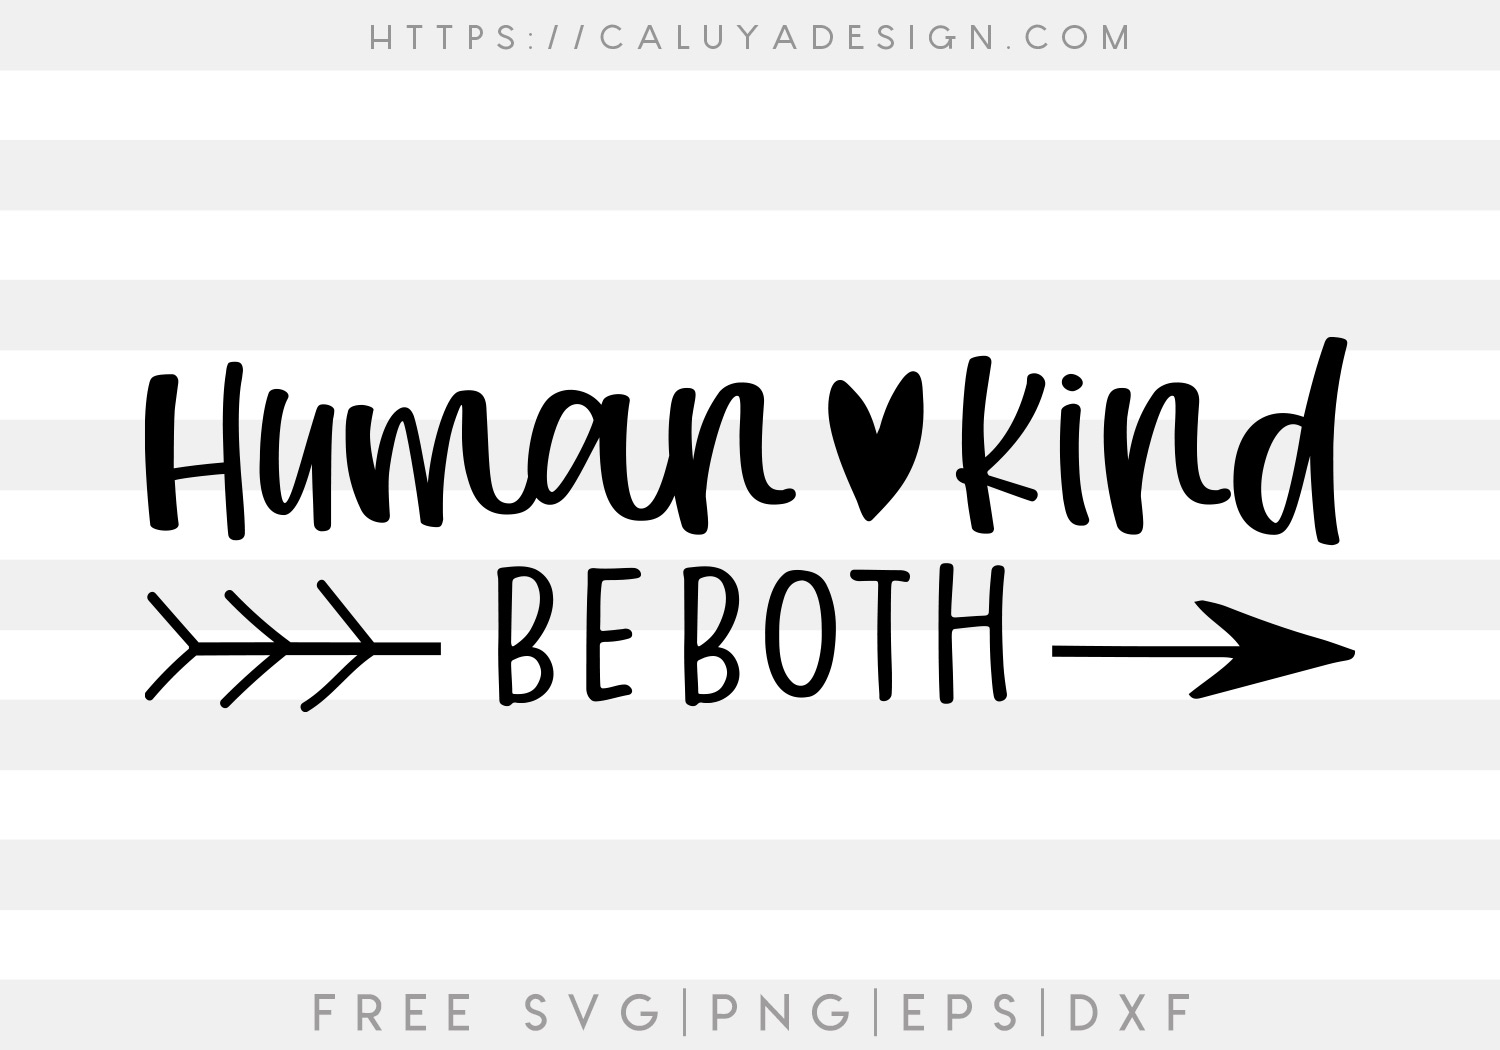 Download Free Human Kind Be Both Svg Png Eps Dxf By Caluya Design